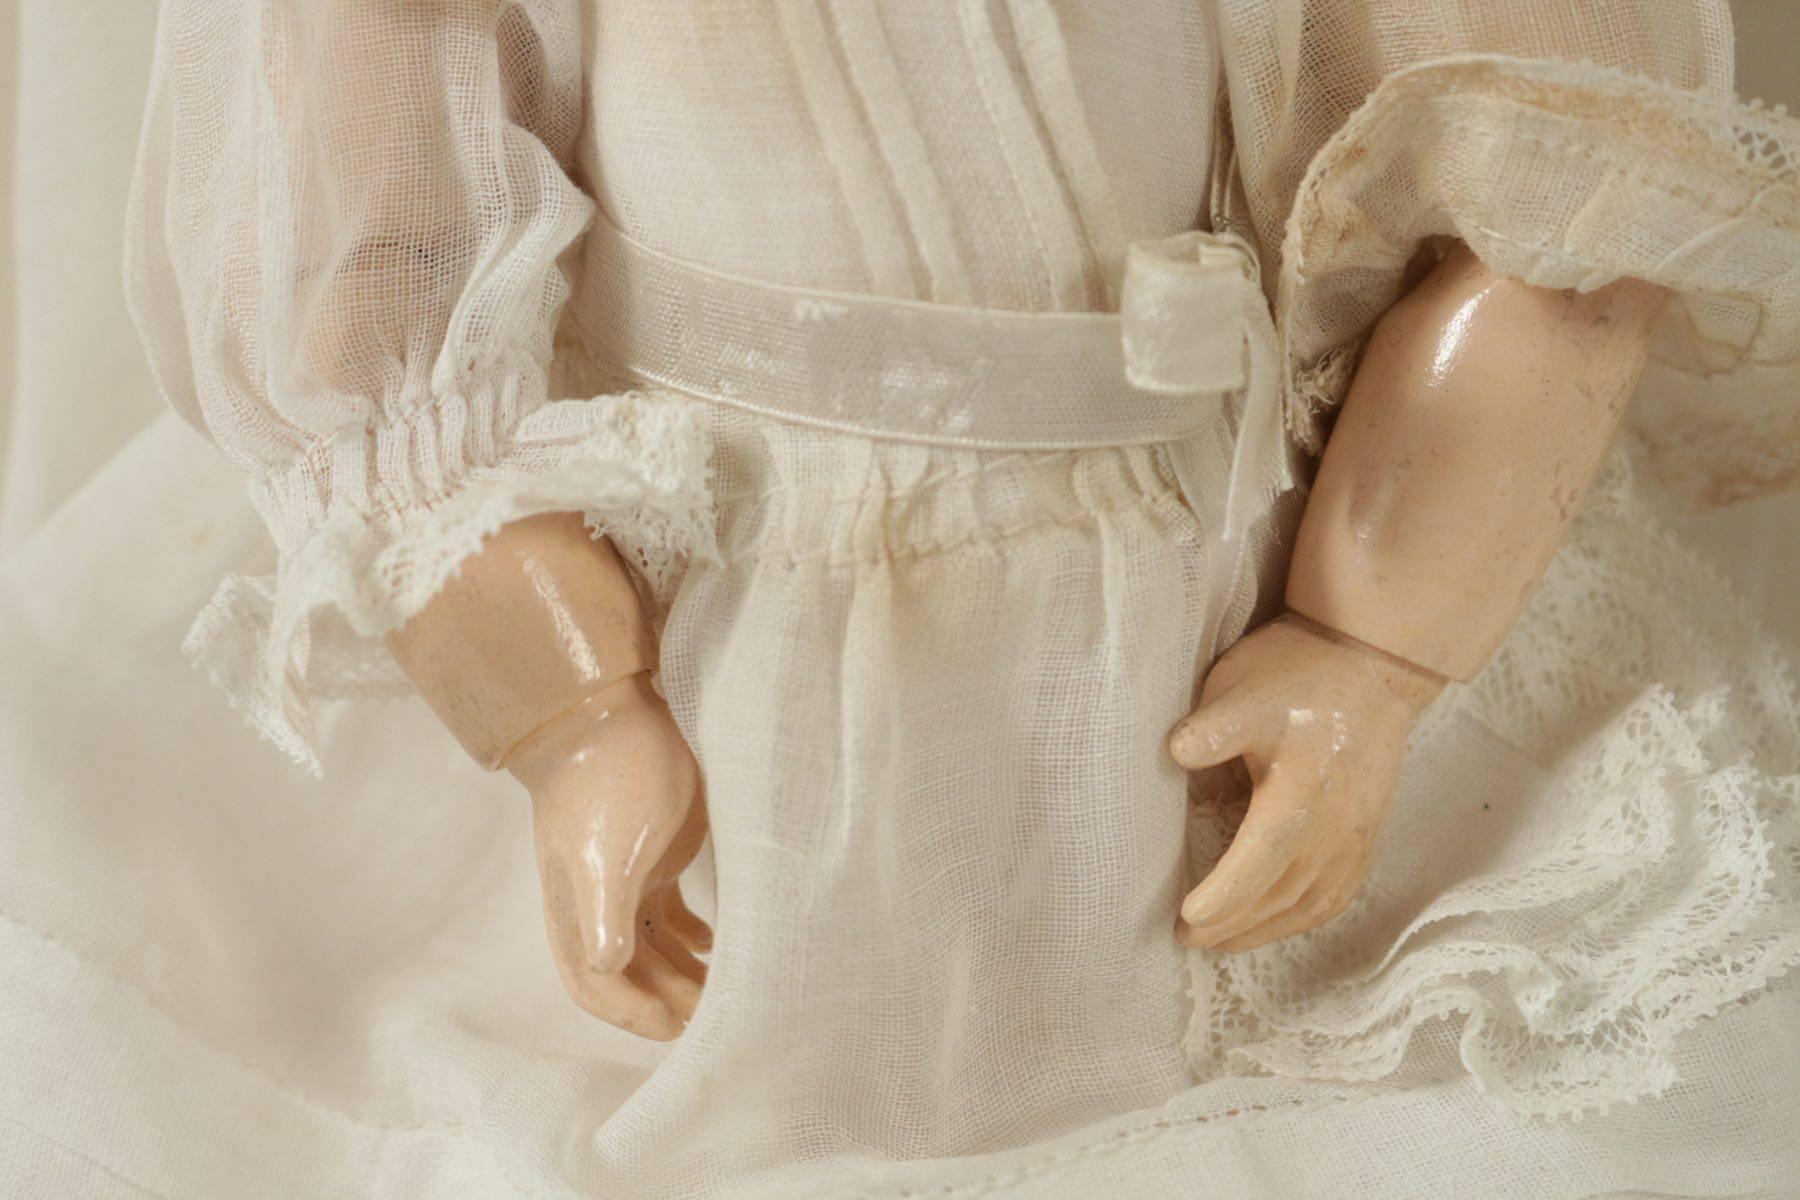 Romantic Doll from the Beginning of the 20th Century Dressed for Sunday